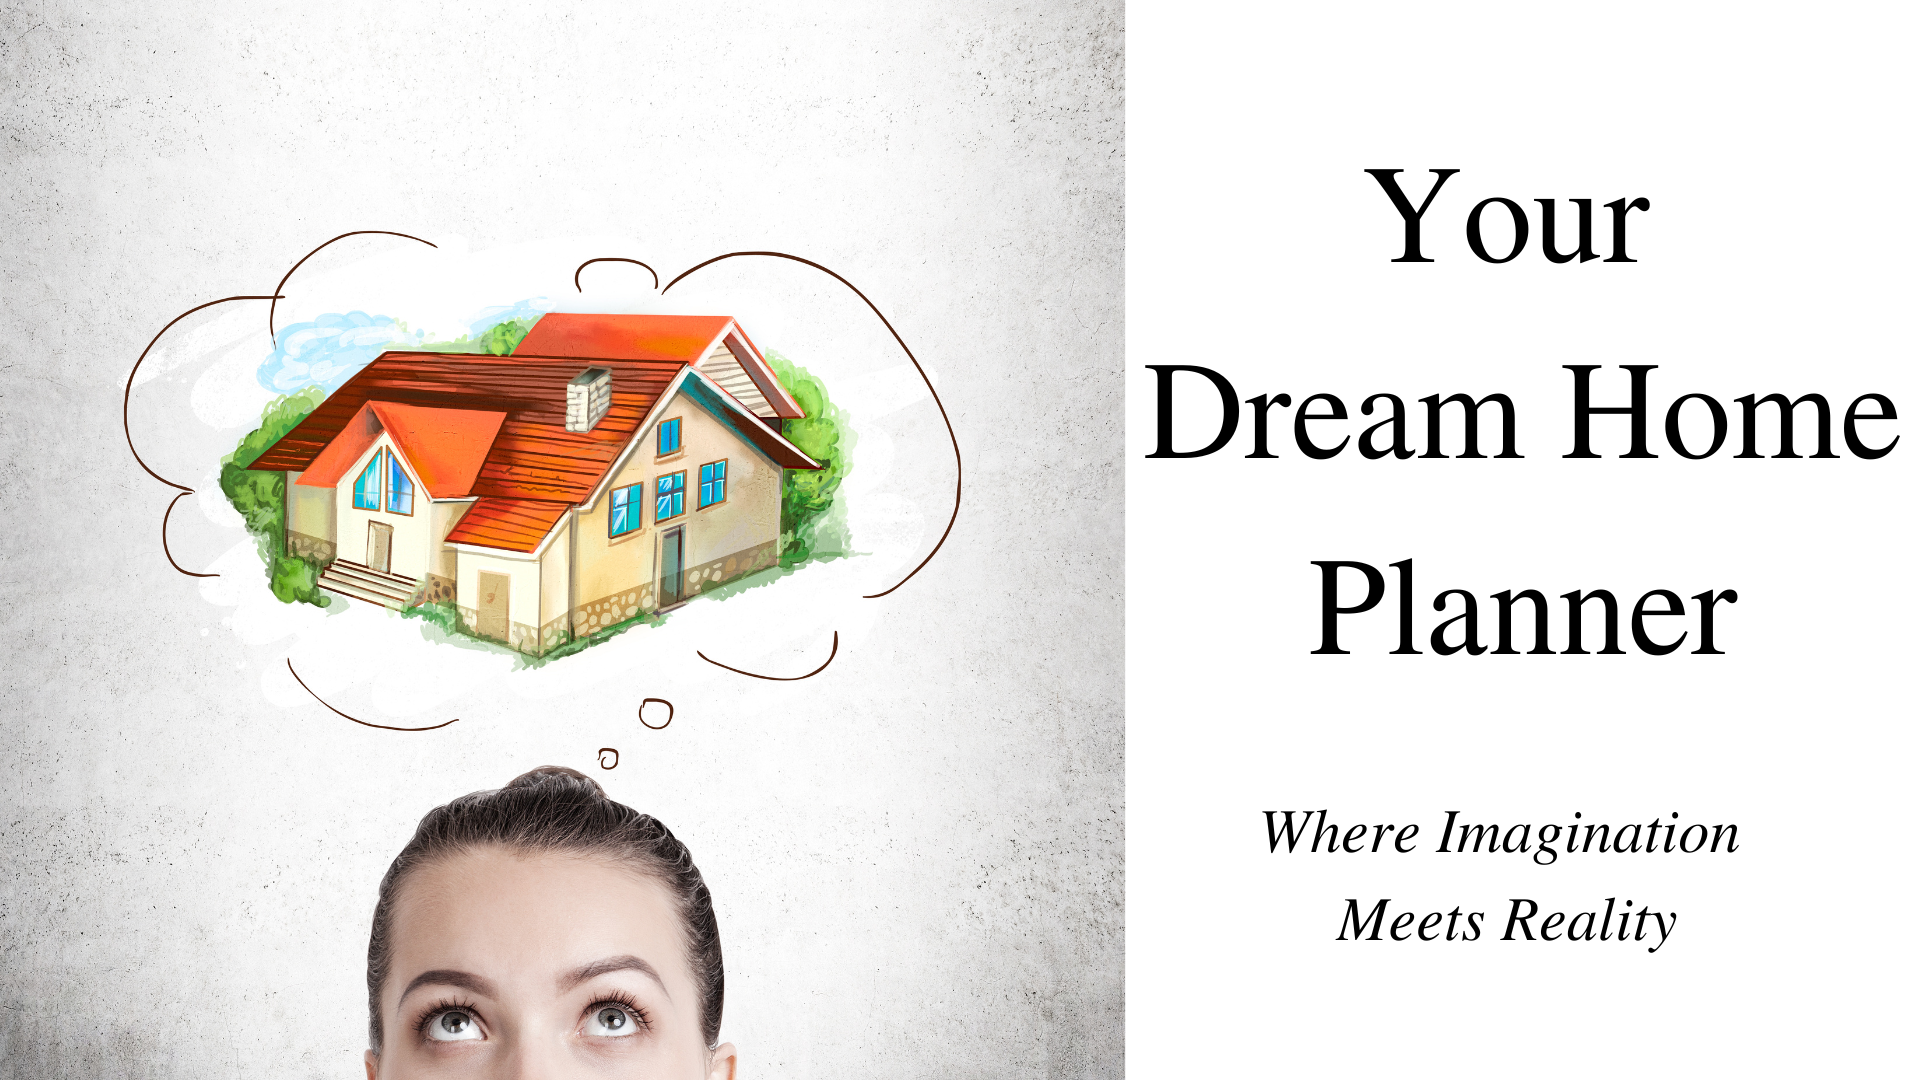 Your Dream Home Planner